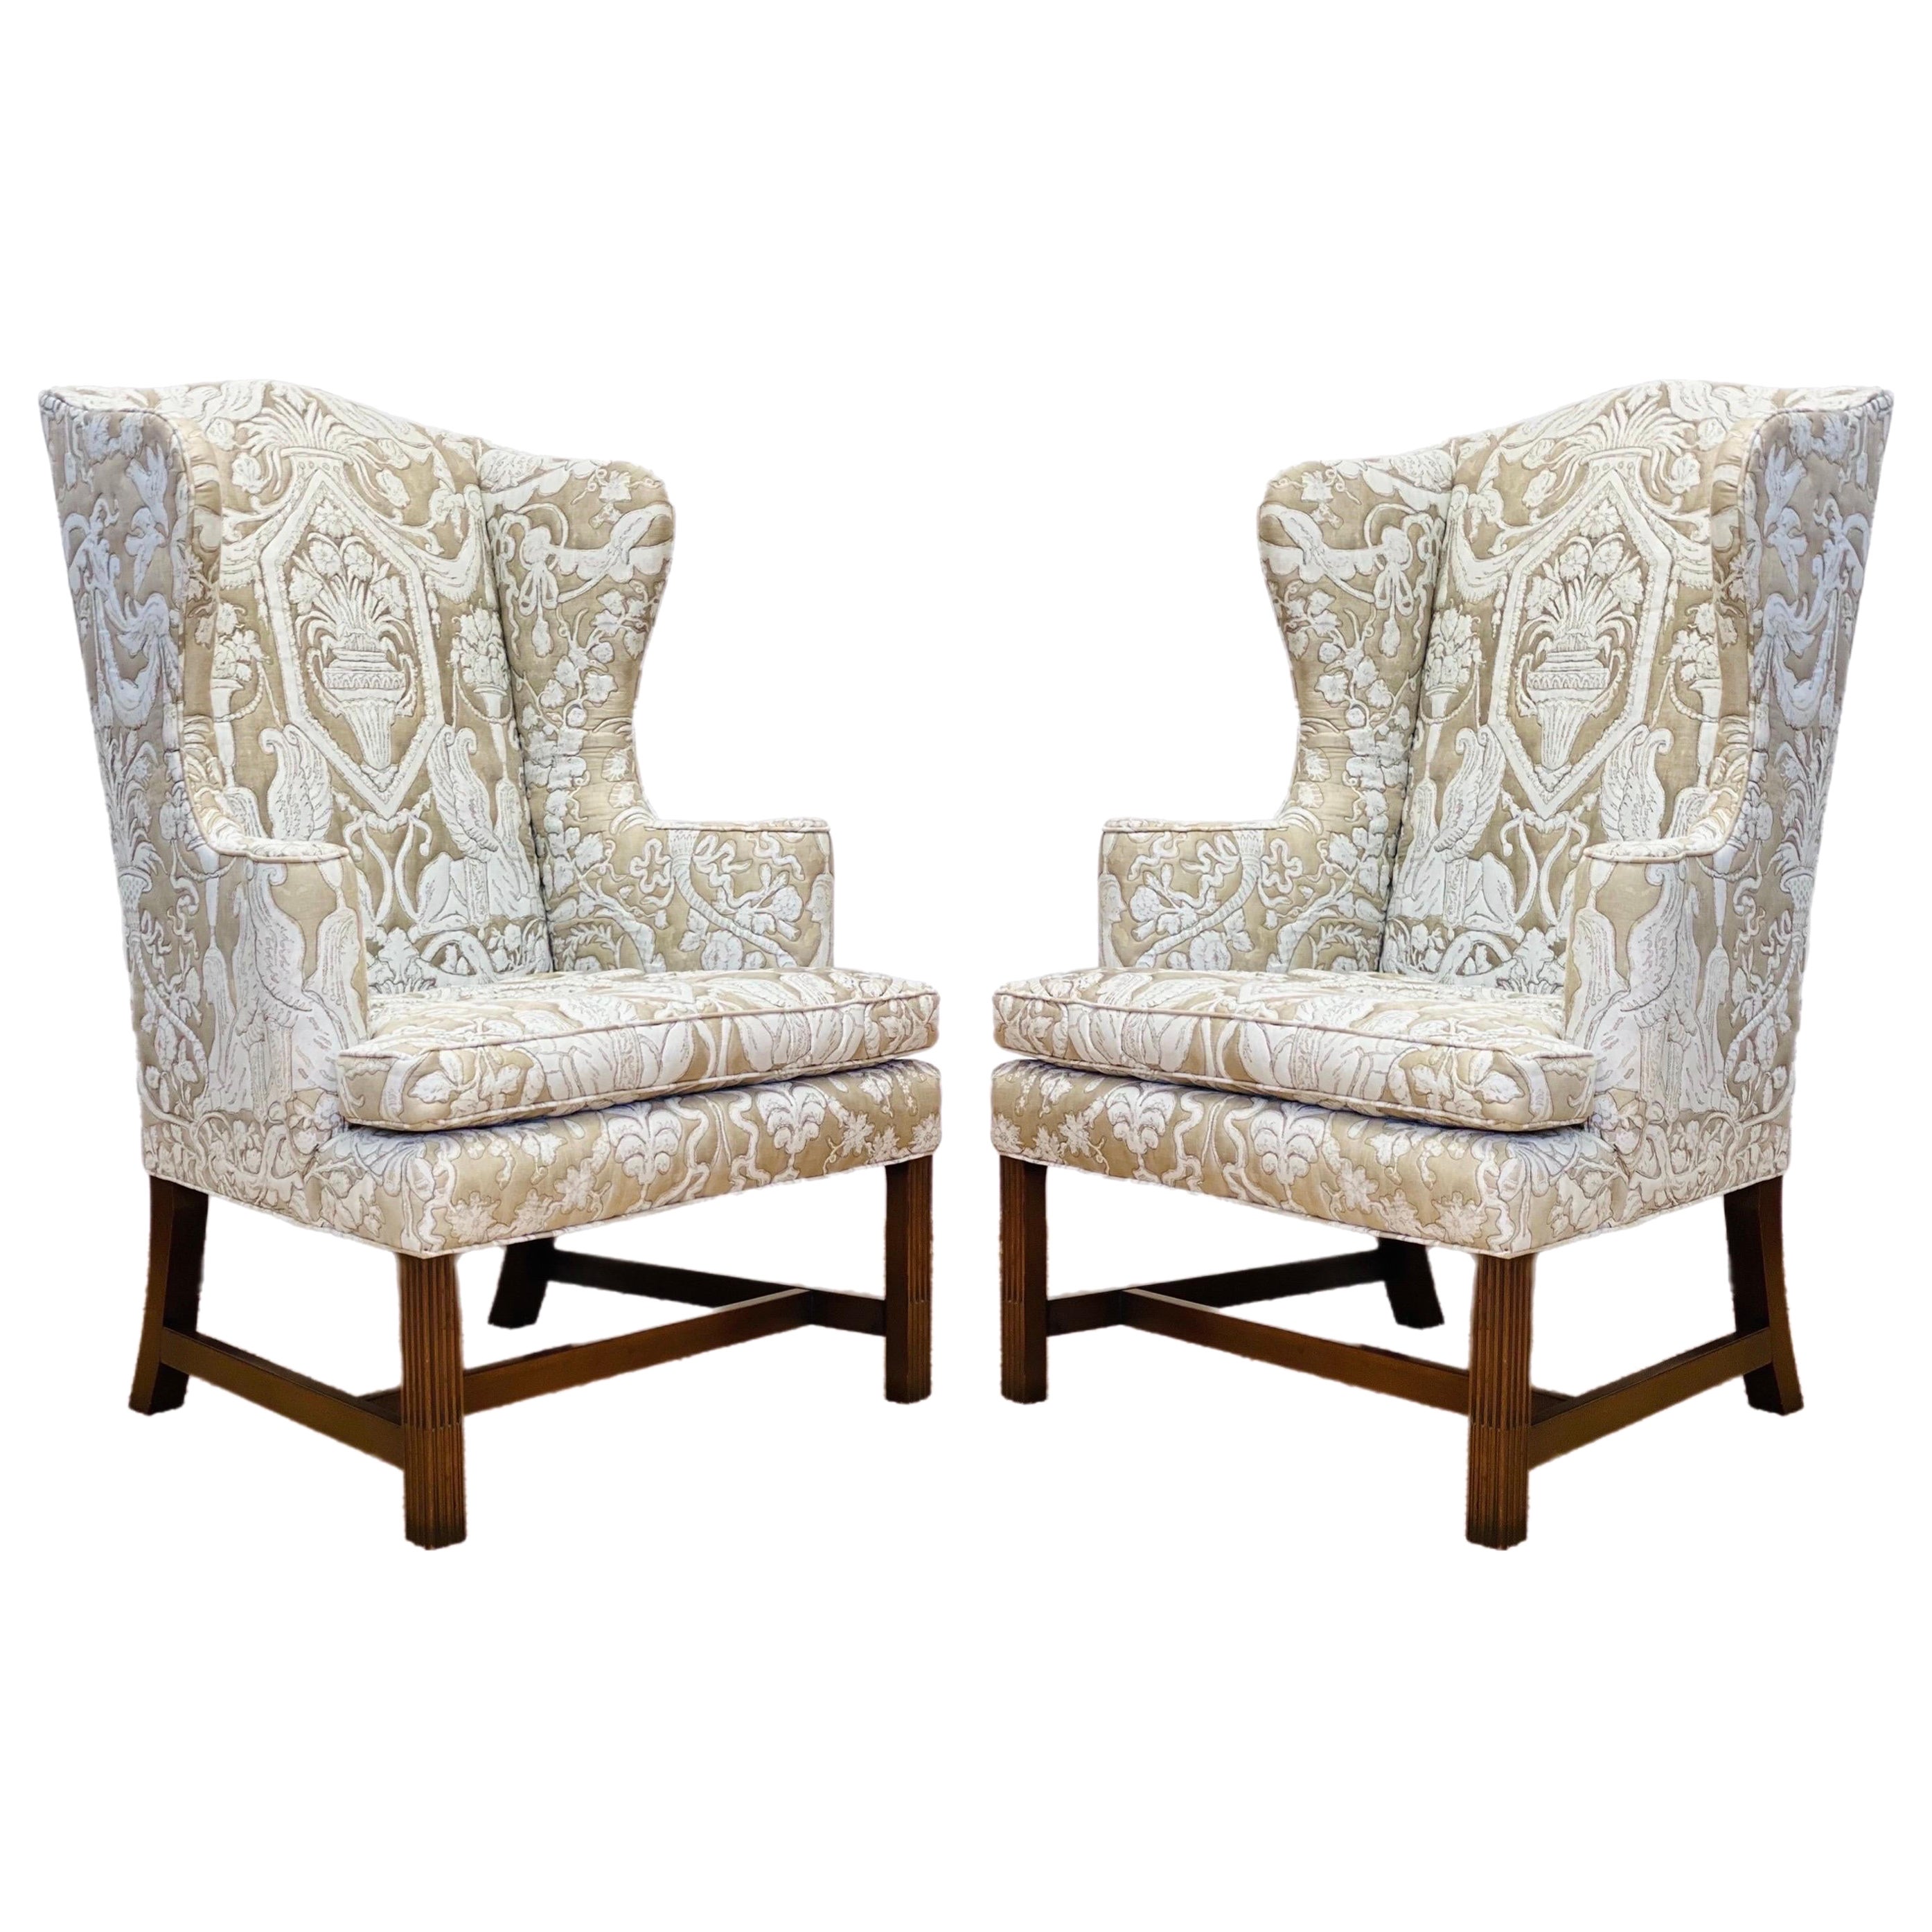 1960s Kittinger Cw12 Colonial Williamsburg Neoclassical Wingback Chairs – a Pair For Sale